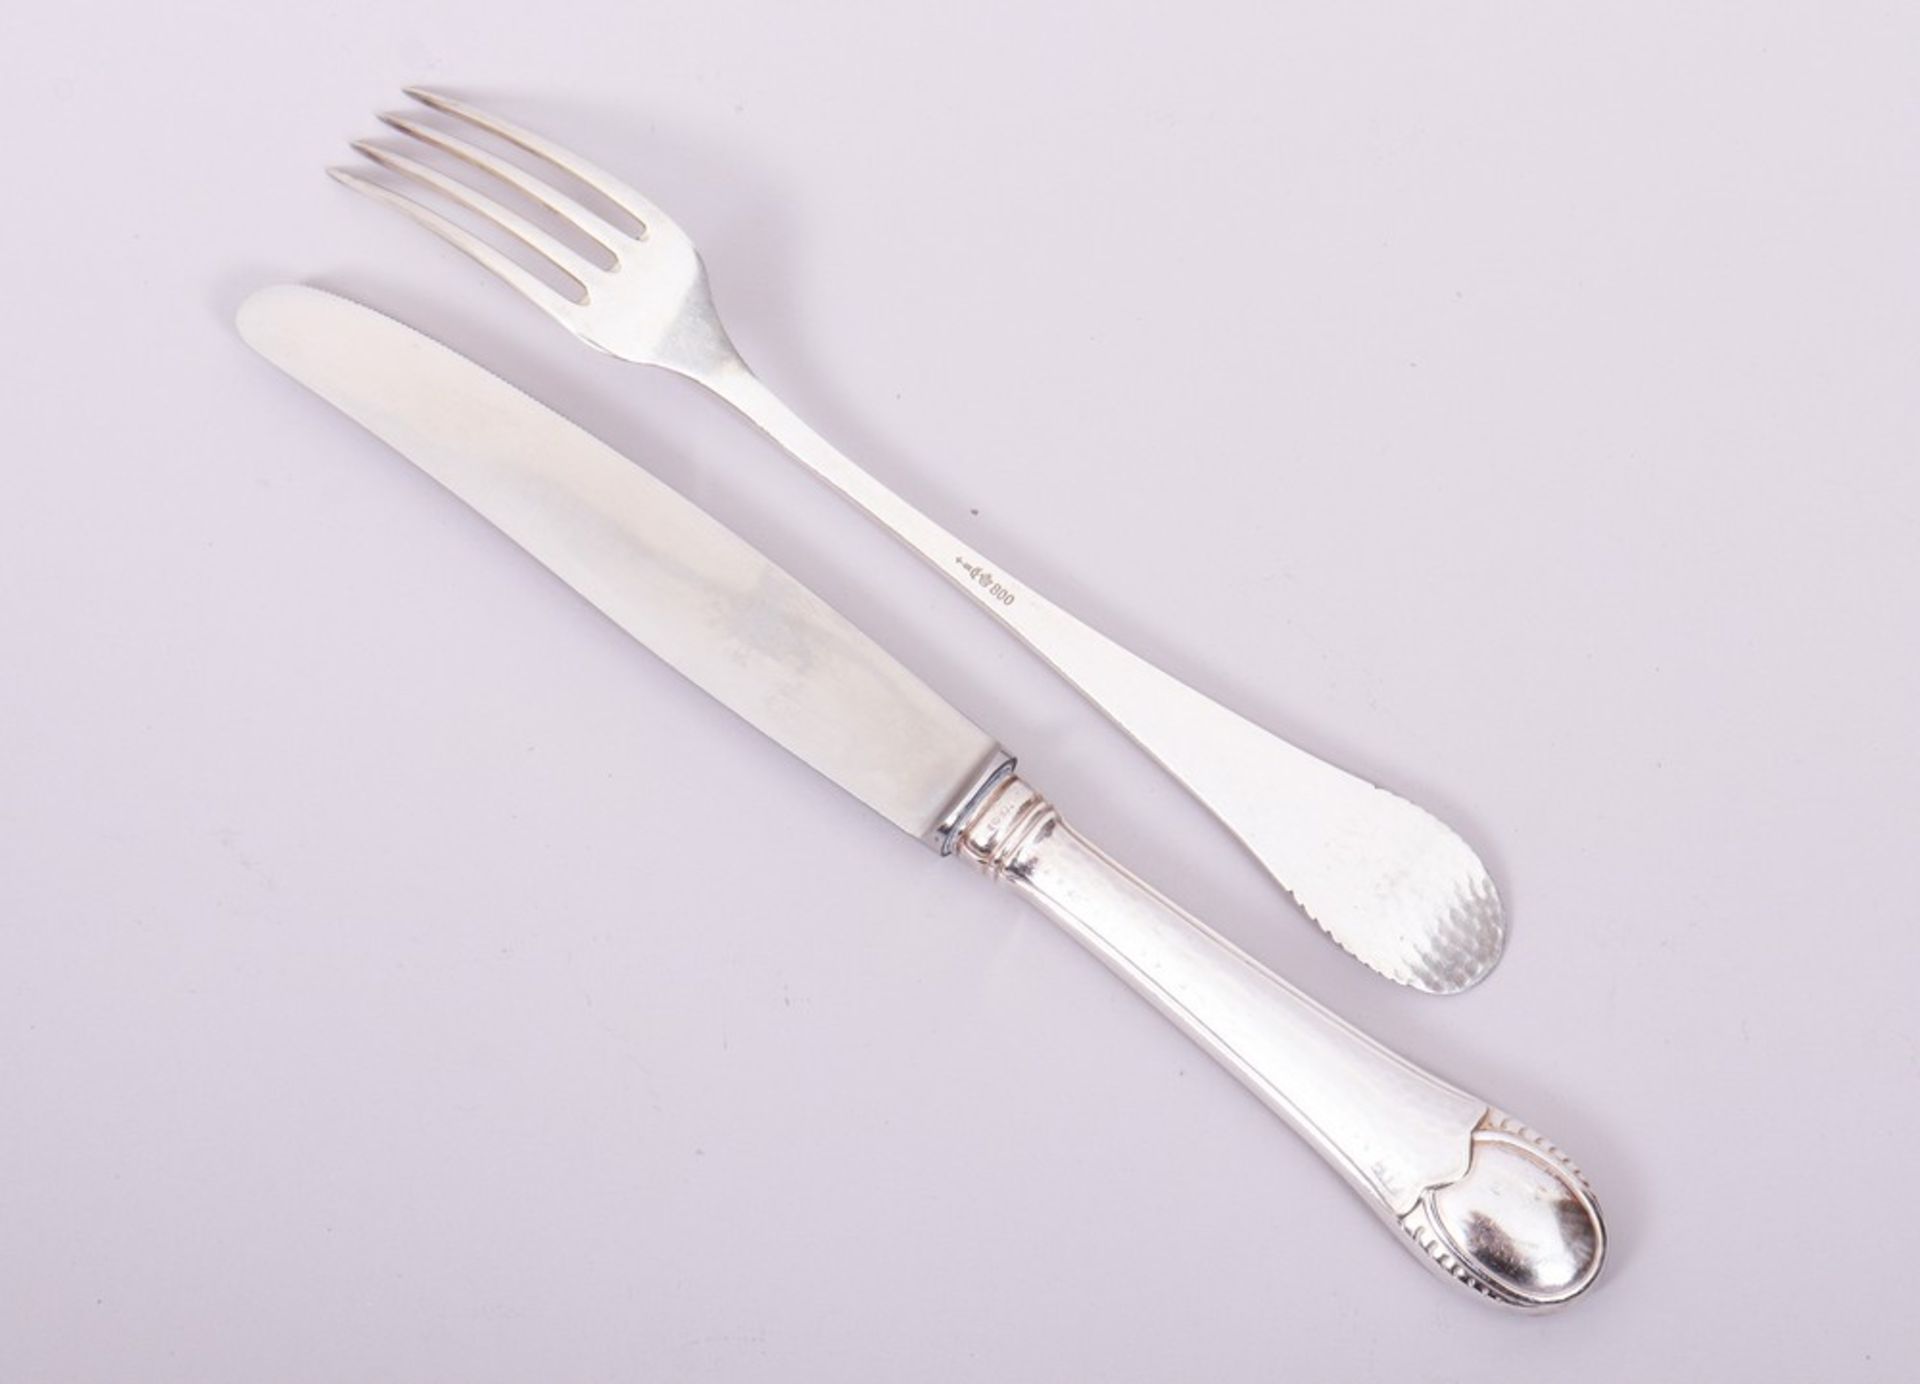 Cutlery for 6 people, 800 silver, Robbe & Berking, Flensburg, 1st half 20th C., 24 pieces - Image 5 of 9